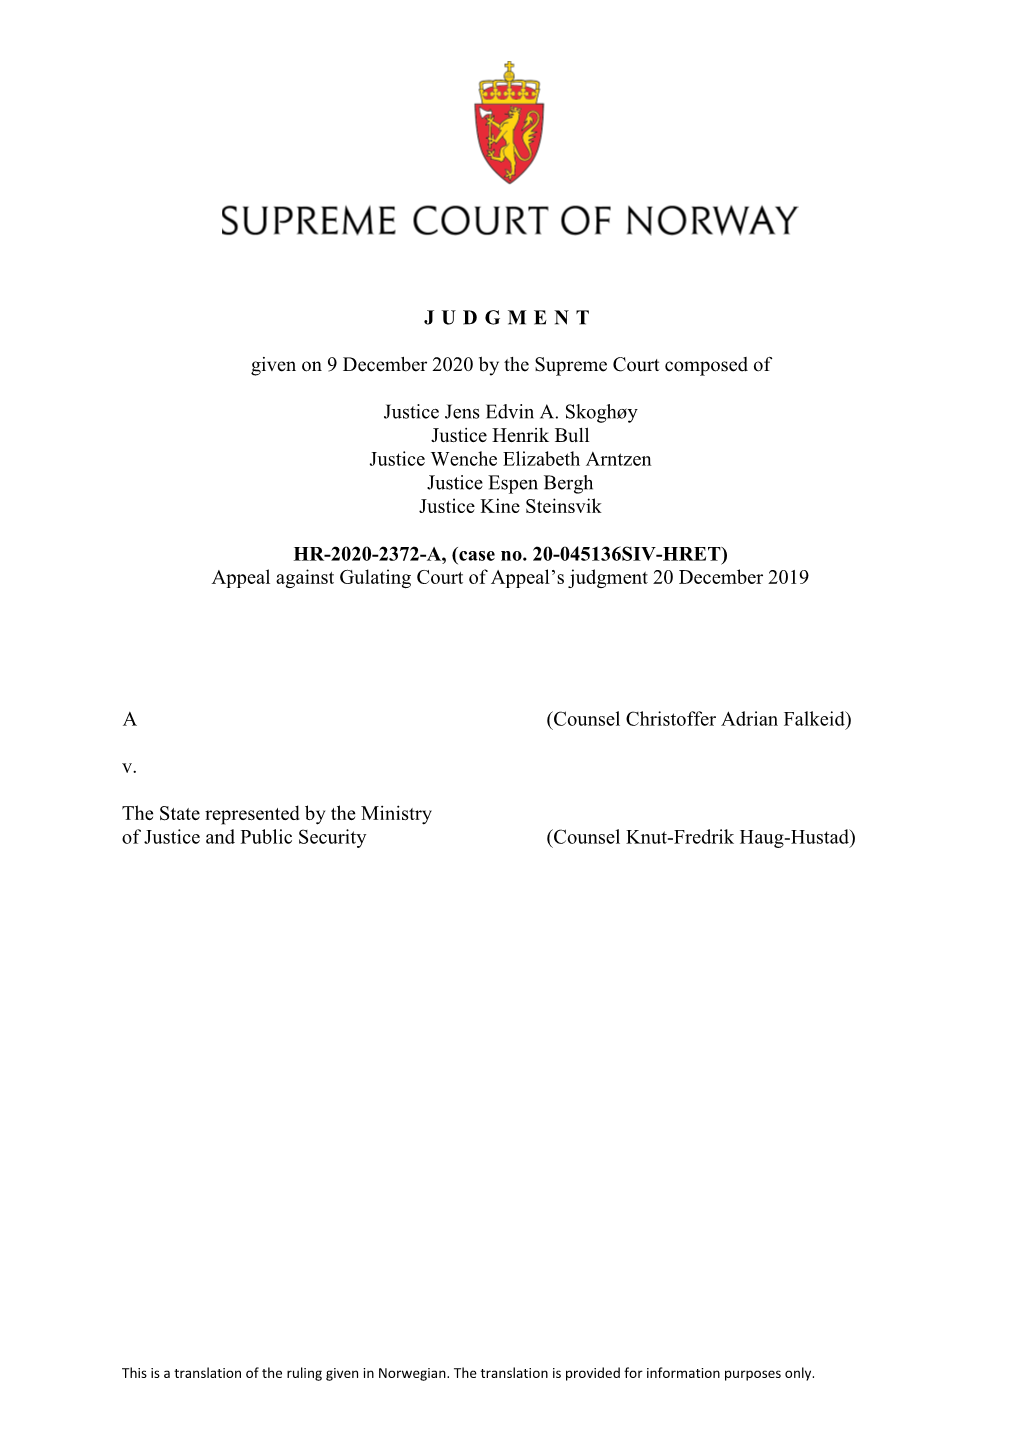 JUDGMENT Given on 9 December 2020 by the Supreme Court